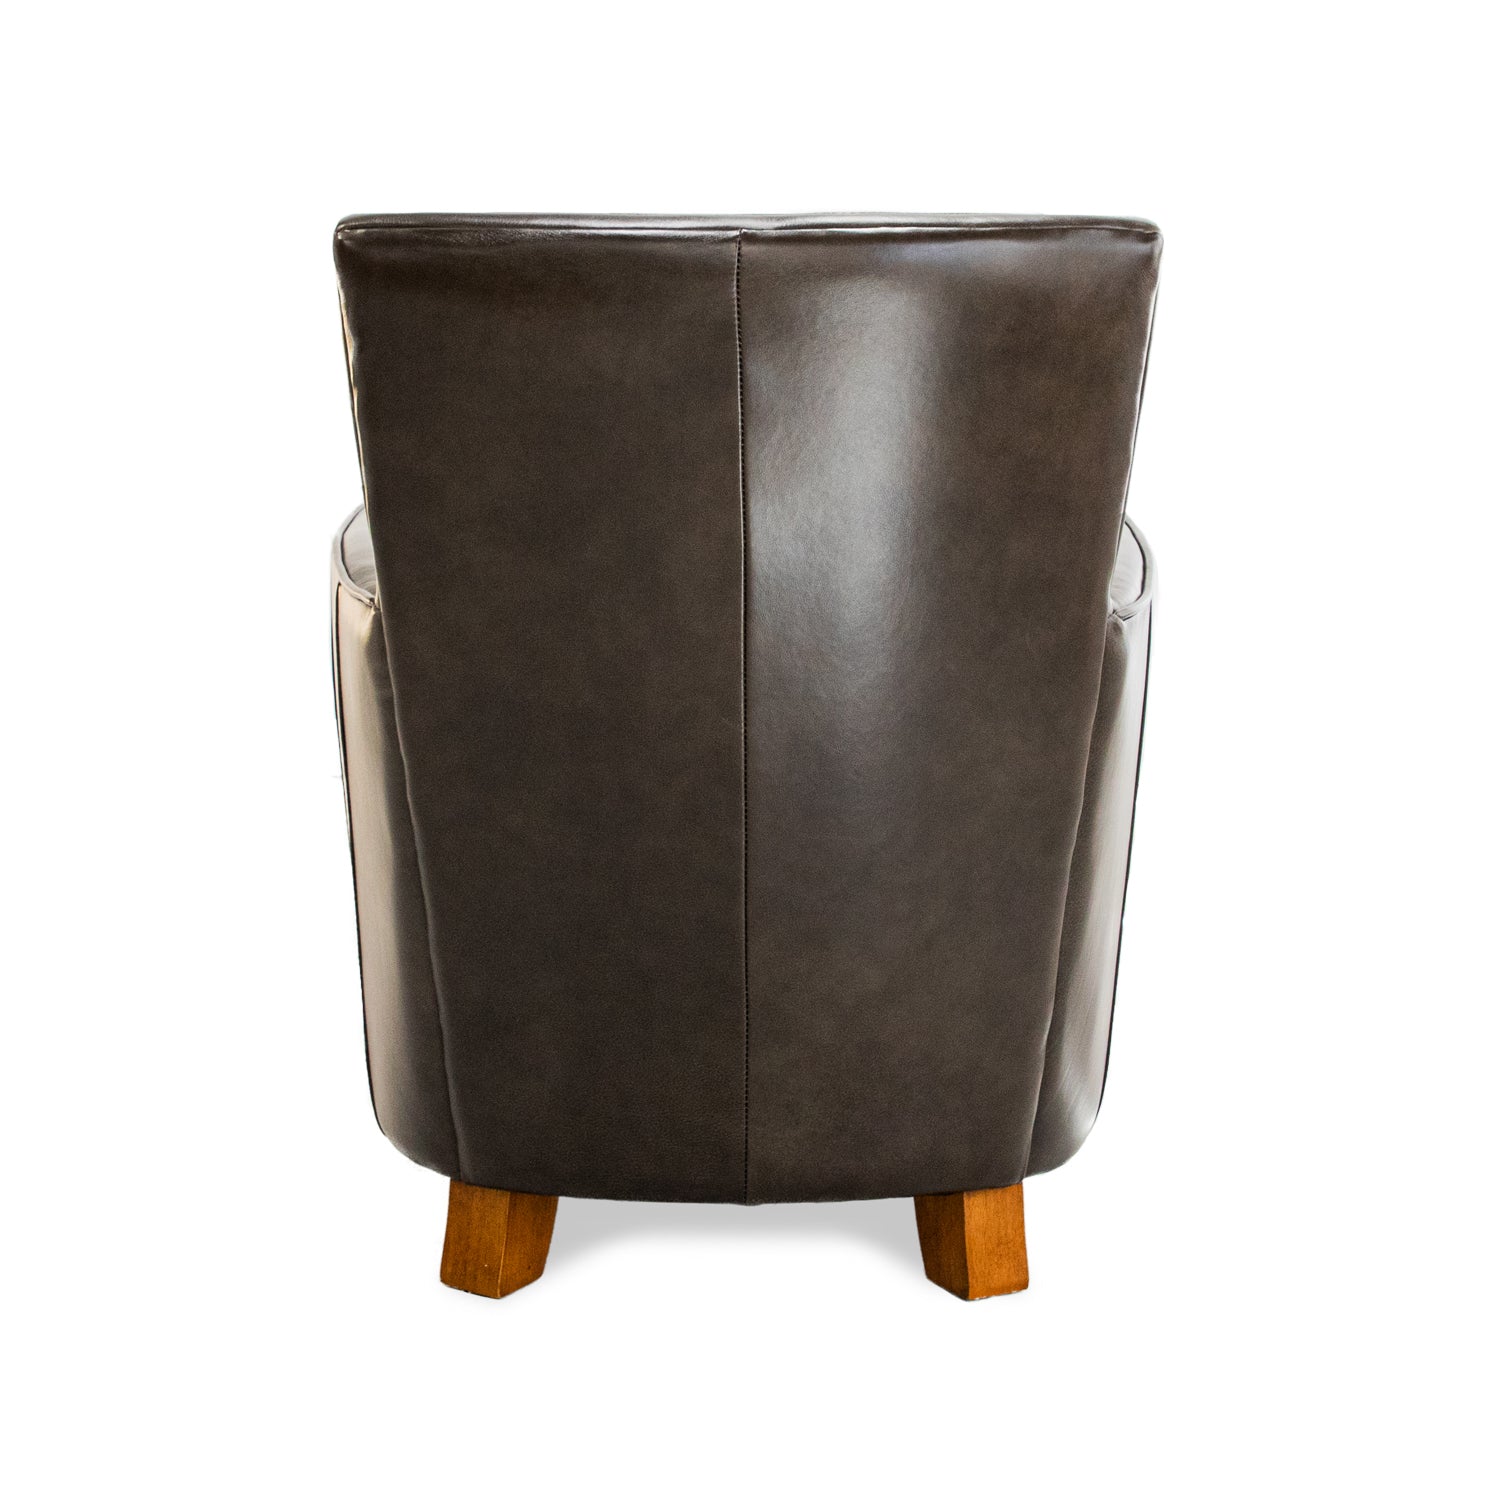 Monteray Leather Chair